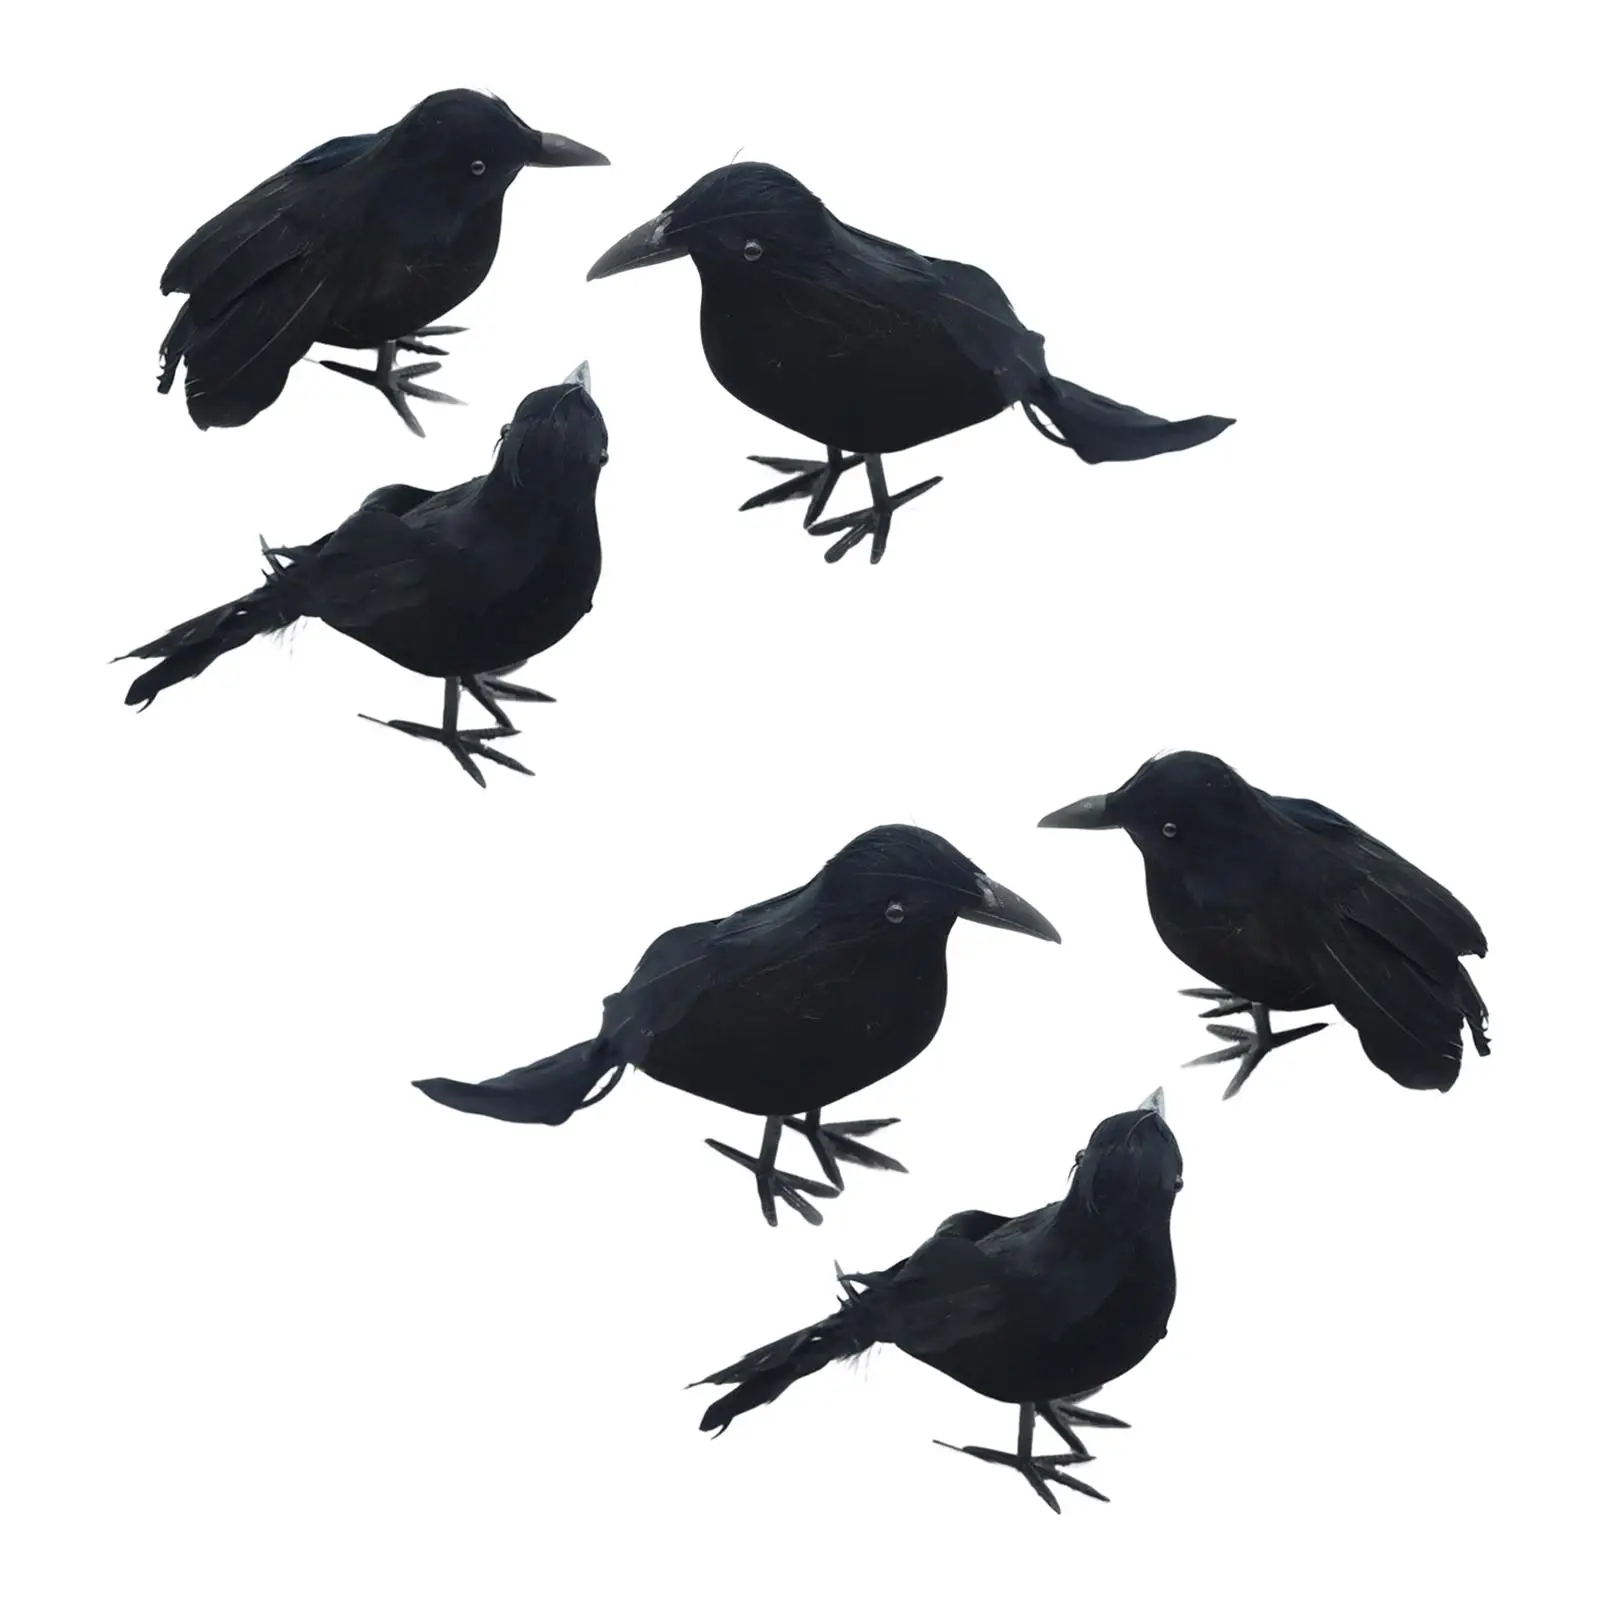 6 Pieces Realistic Halloween Crows Halloween Crows and Ravens Decor for Party Event Fancy dress Decorative